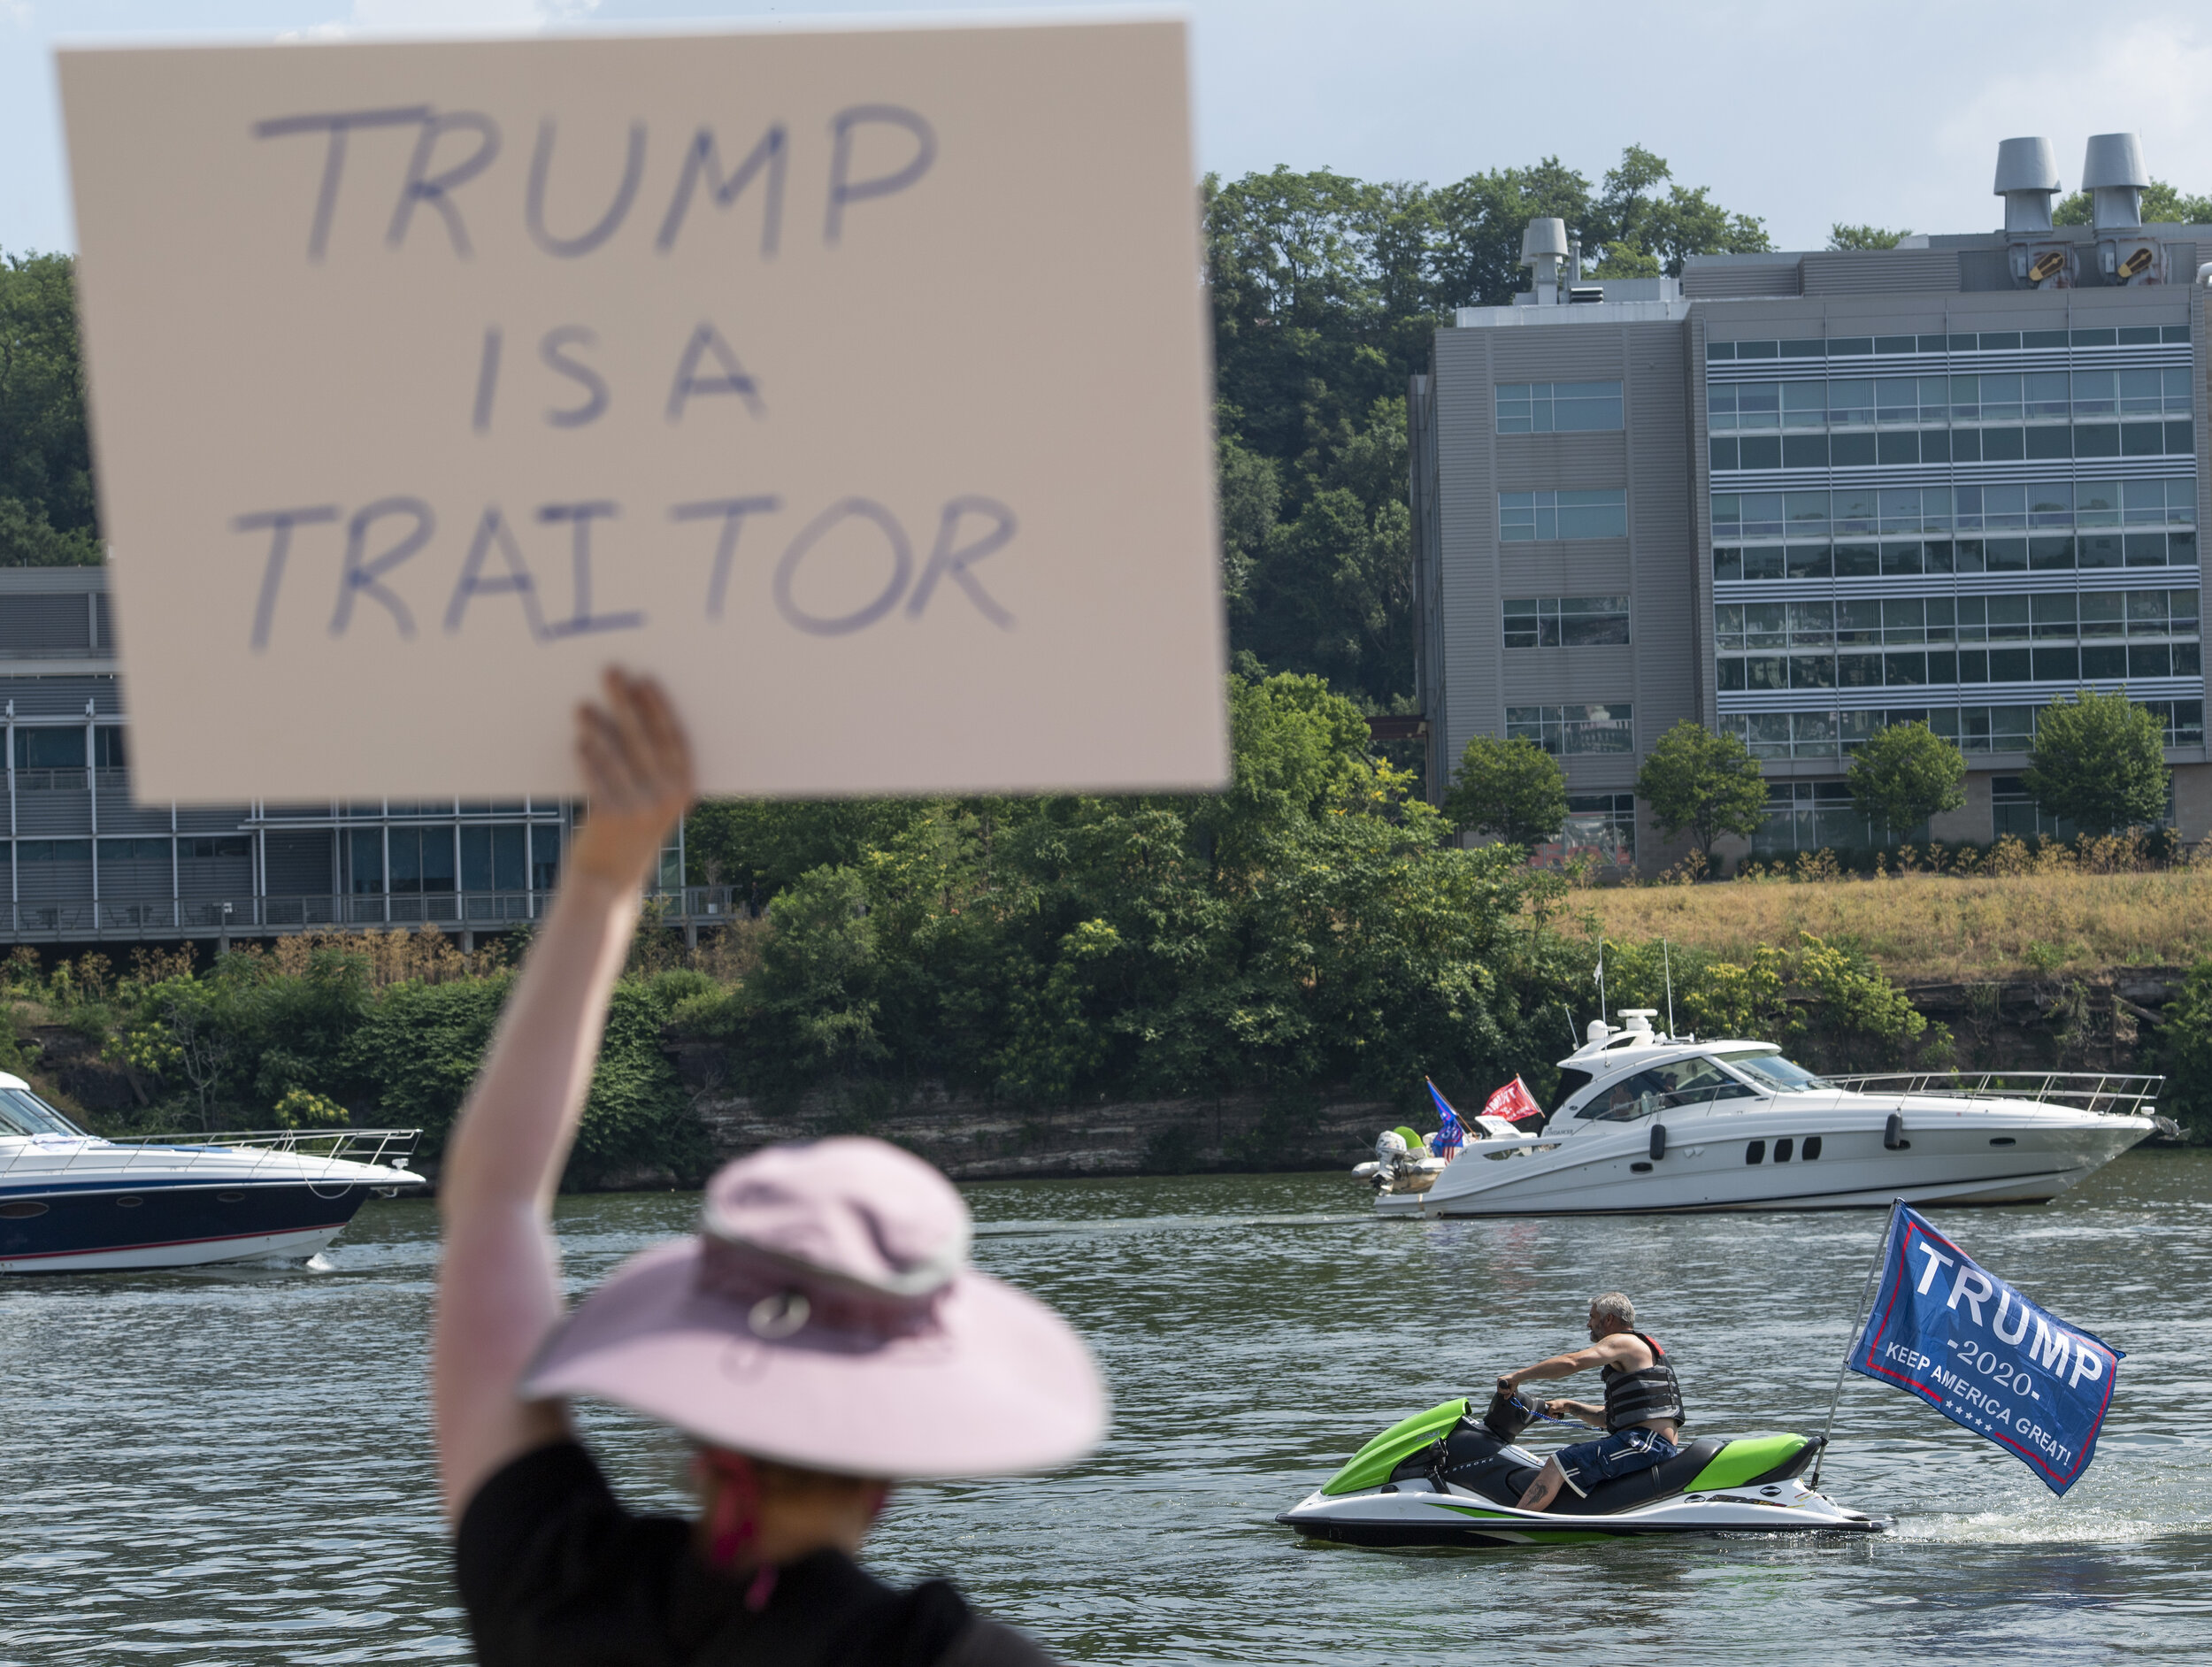  Participants of the 4th of July Trump Team PA Boat Parade and MAGA Rally get their boats ready while others protest the event on Saturday, July 4, 2020, near the Hot Metal Bridge on the South Side of Pittsburgh.  